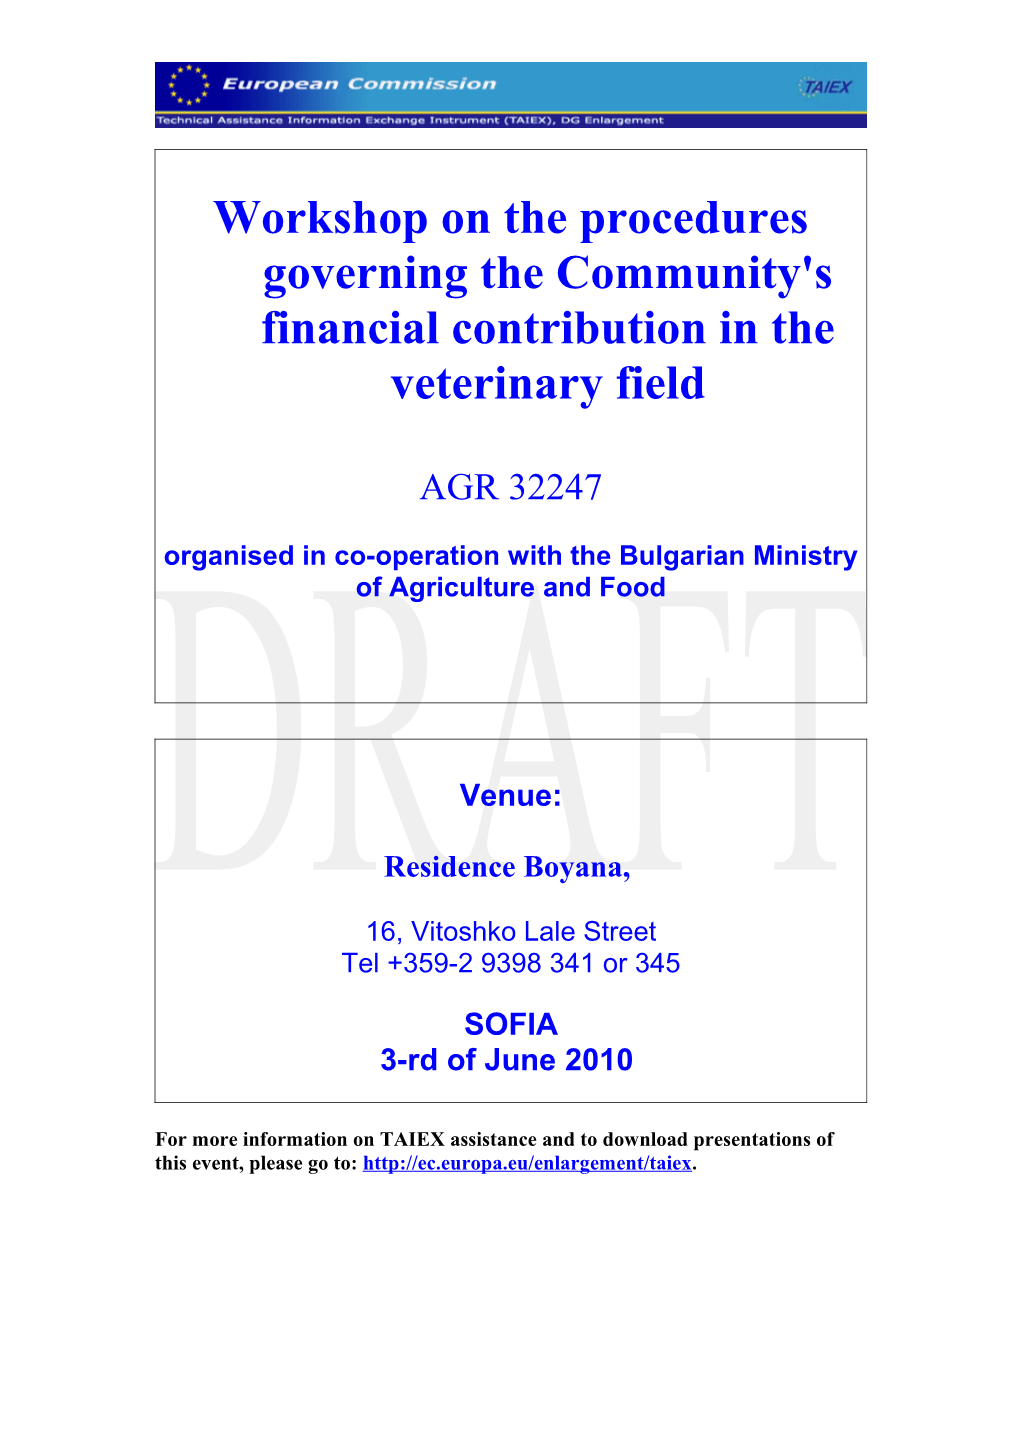 Workshop on the Procedures Governing the Union's Financial Contribution in the Veterinary Field